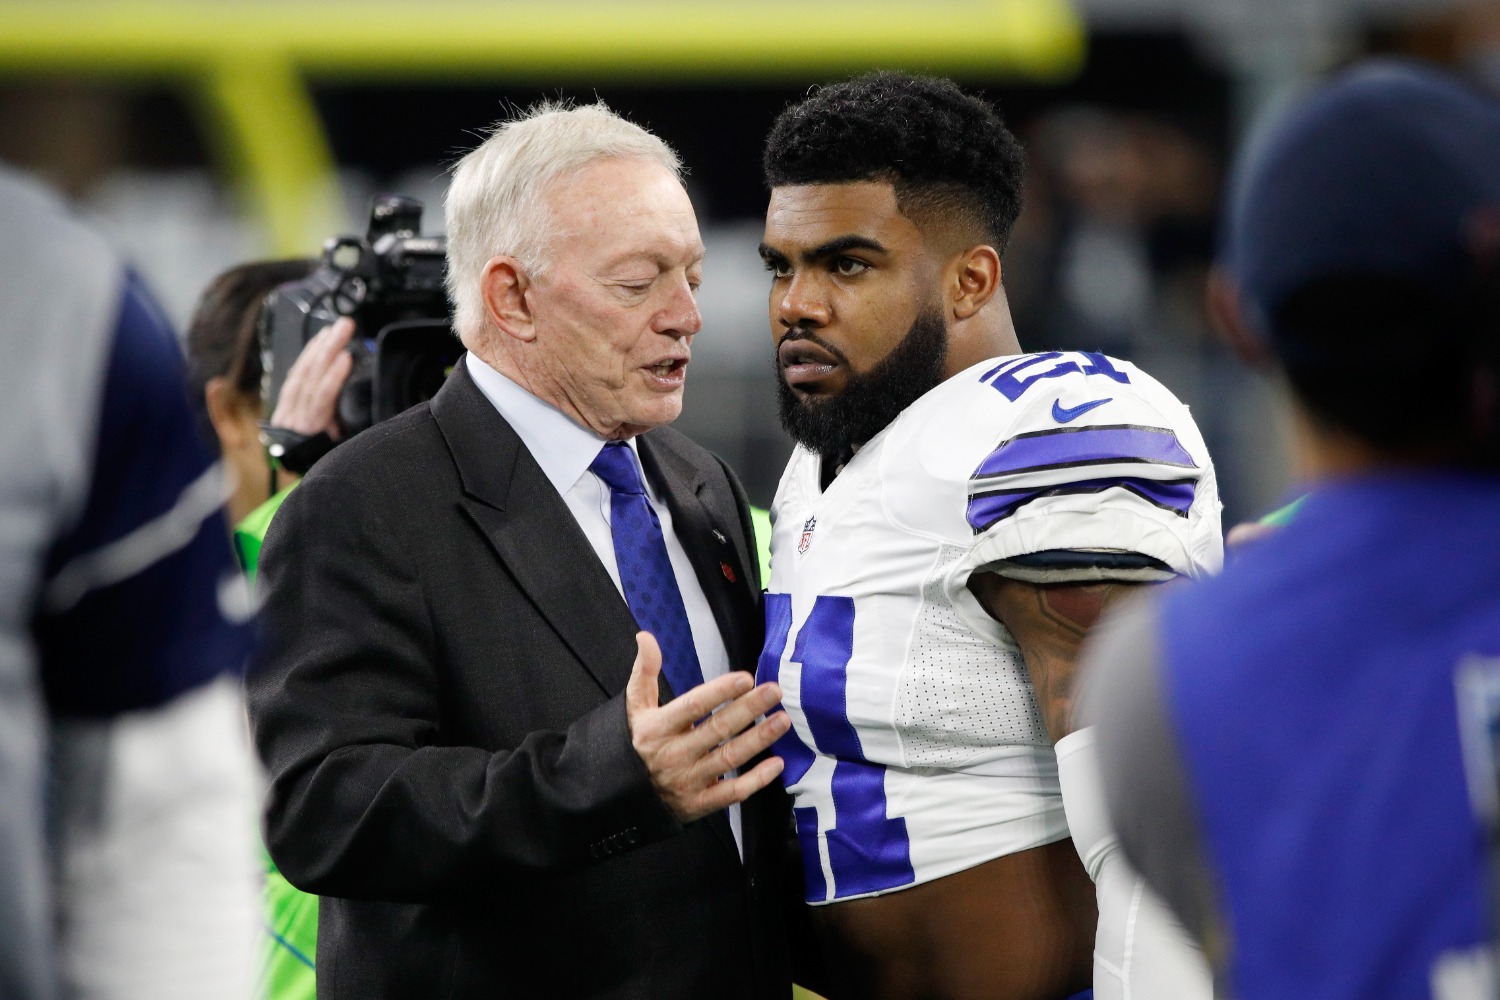 Cowboys owner Jerry Jones revealed a new role for Ezekiel Elliott that could propel Dallas to its first Super Bowl title since 1996.